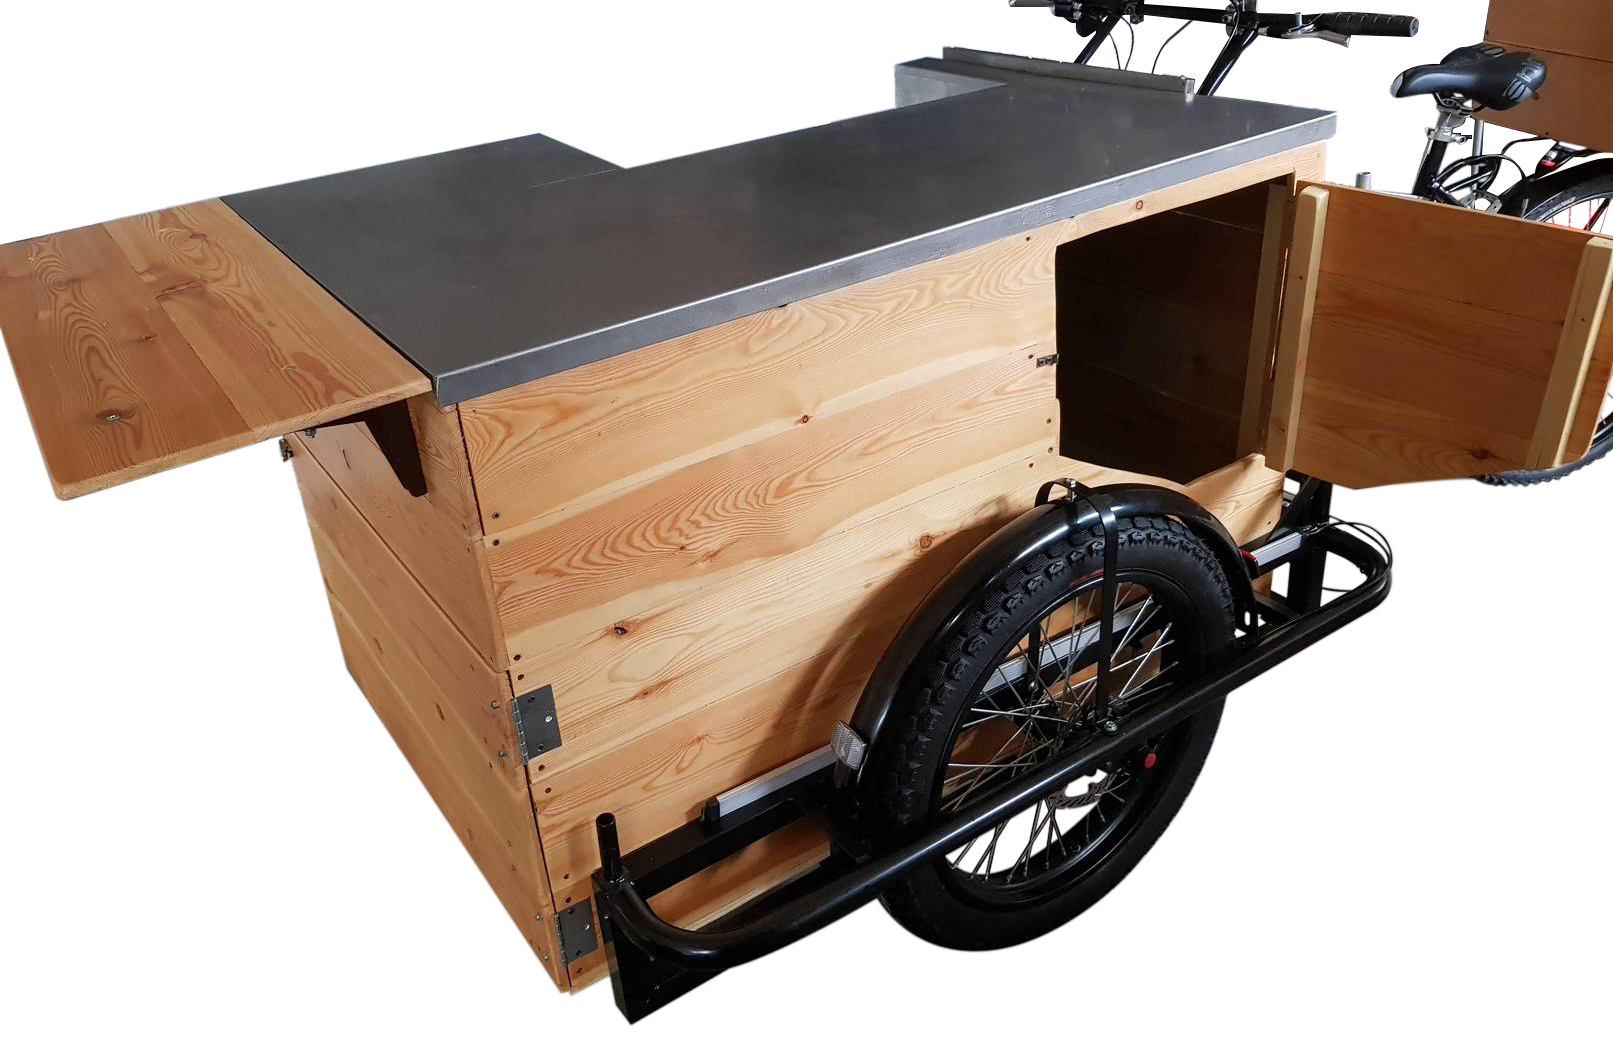 BANCO_HAWAI_TRICYCLE_WOODEN_WORKBENCH_IN_LEGNO_TRICICLO_STREETFOOD_7